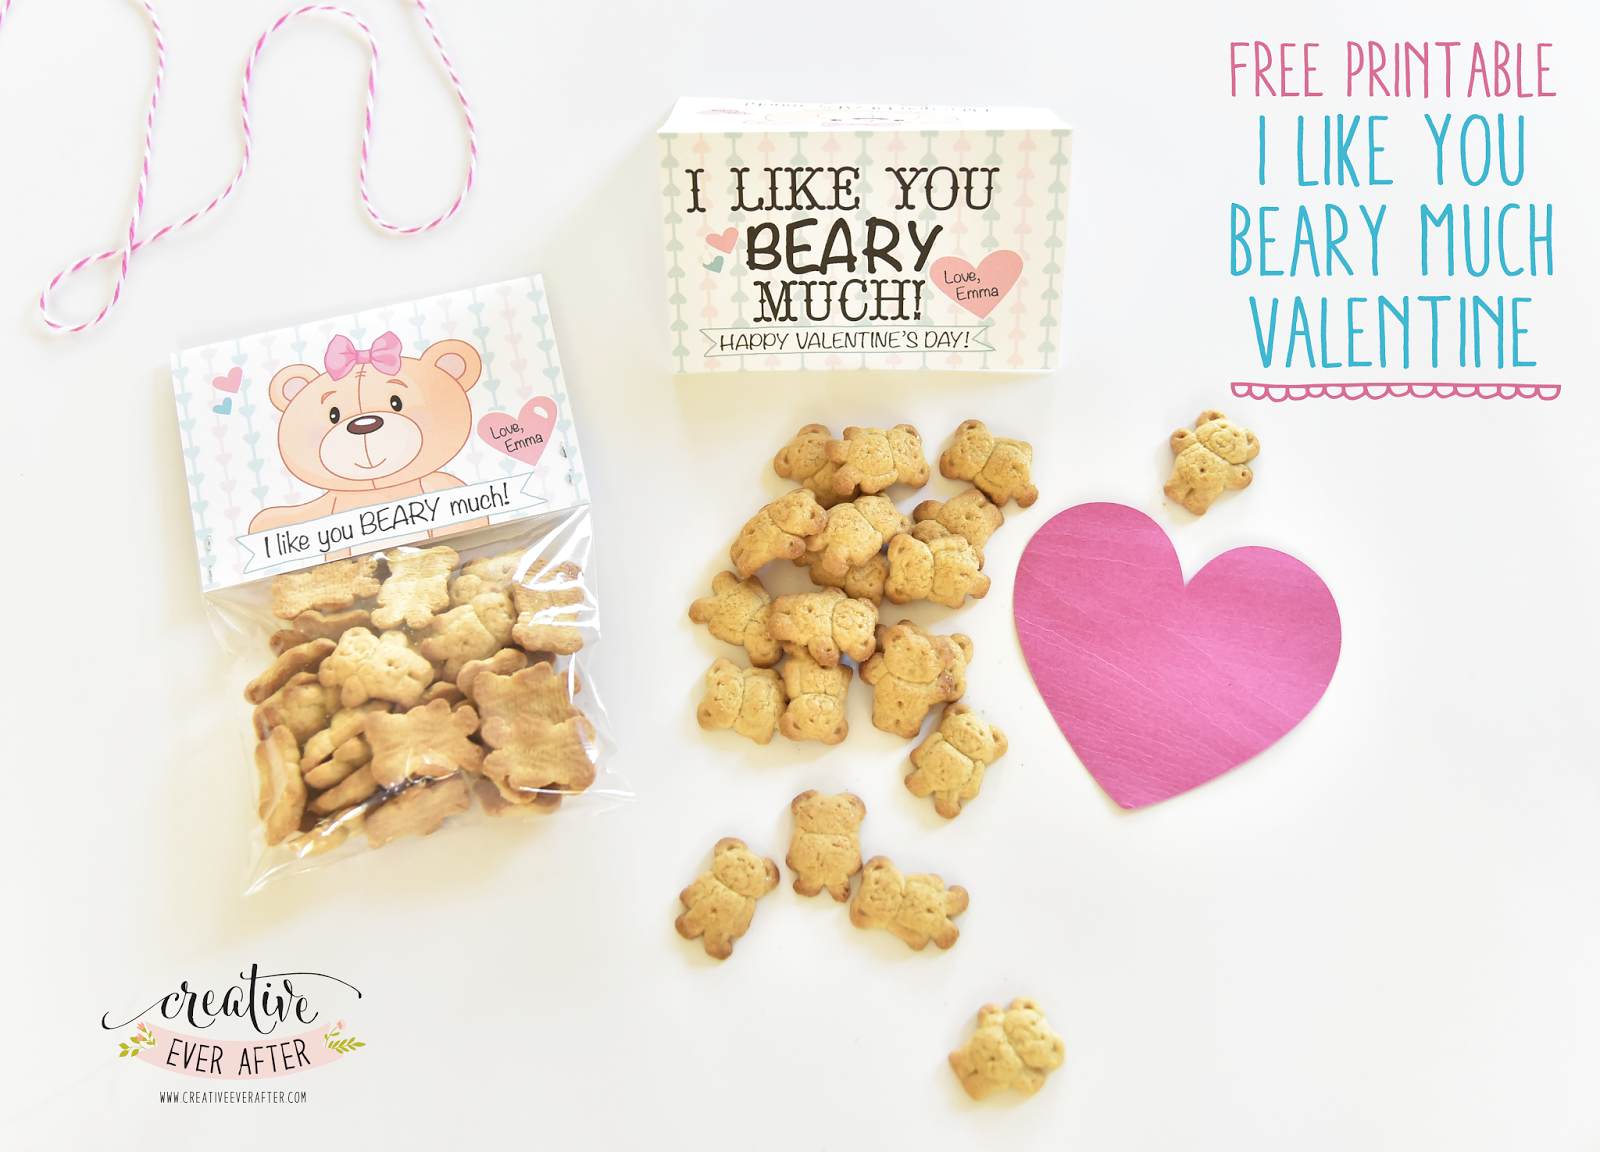 http://creativeeverafter.blogspot.com/2015/02/free-printable-i-like-you-beary-much.html#more